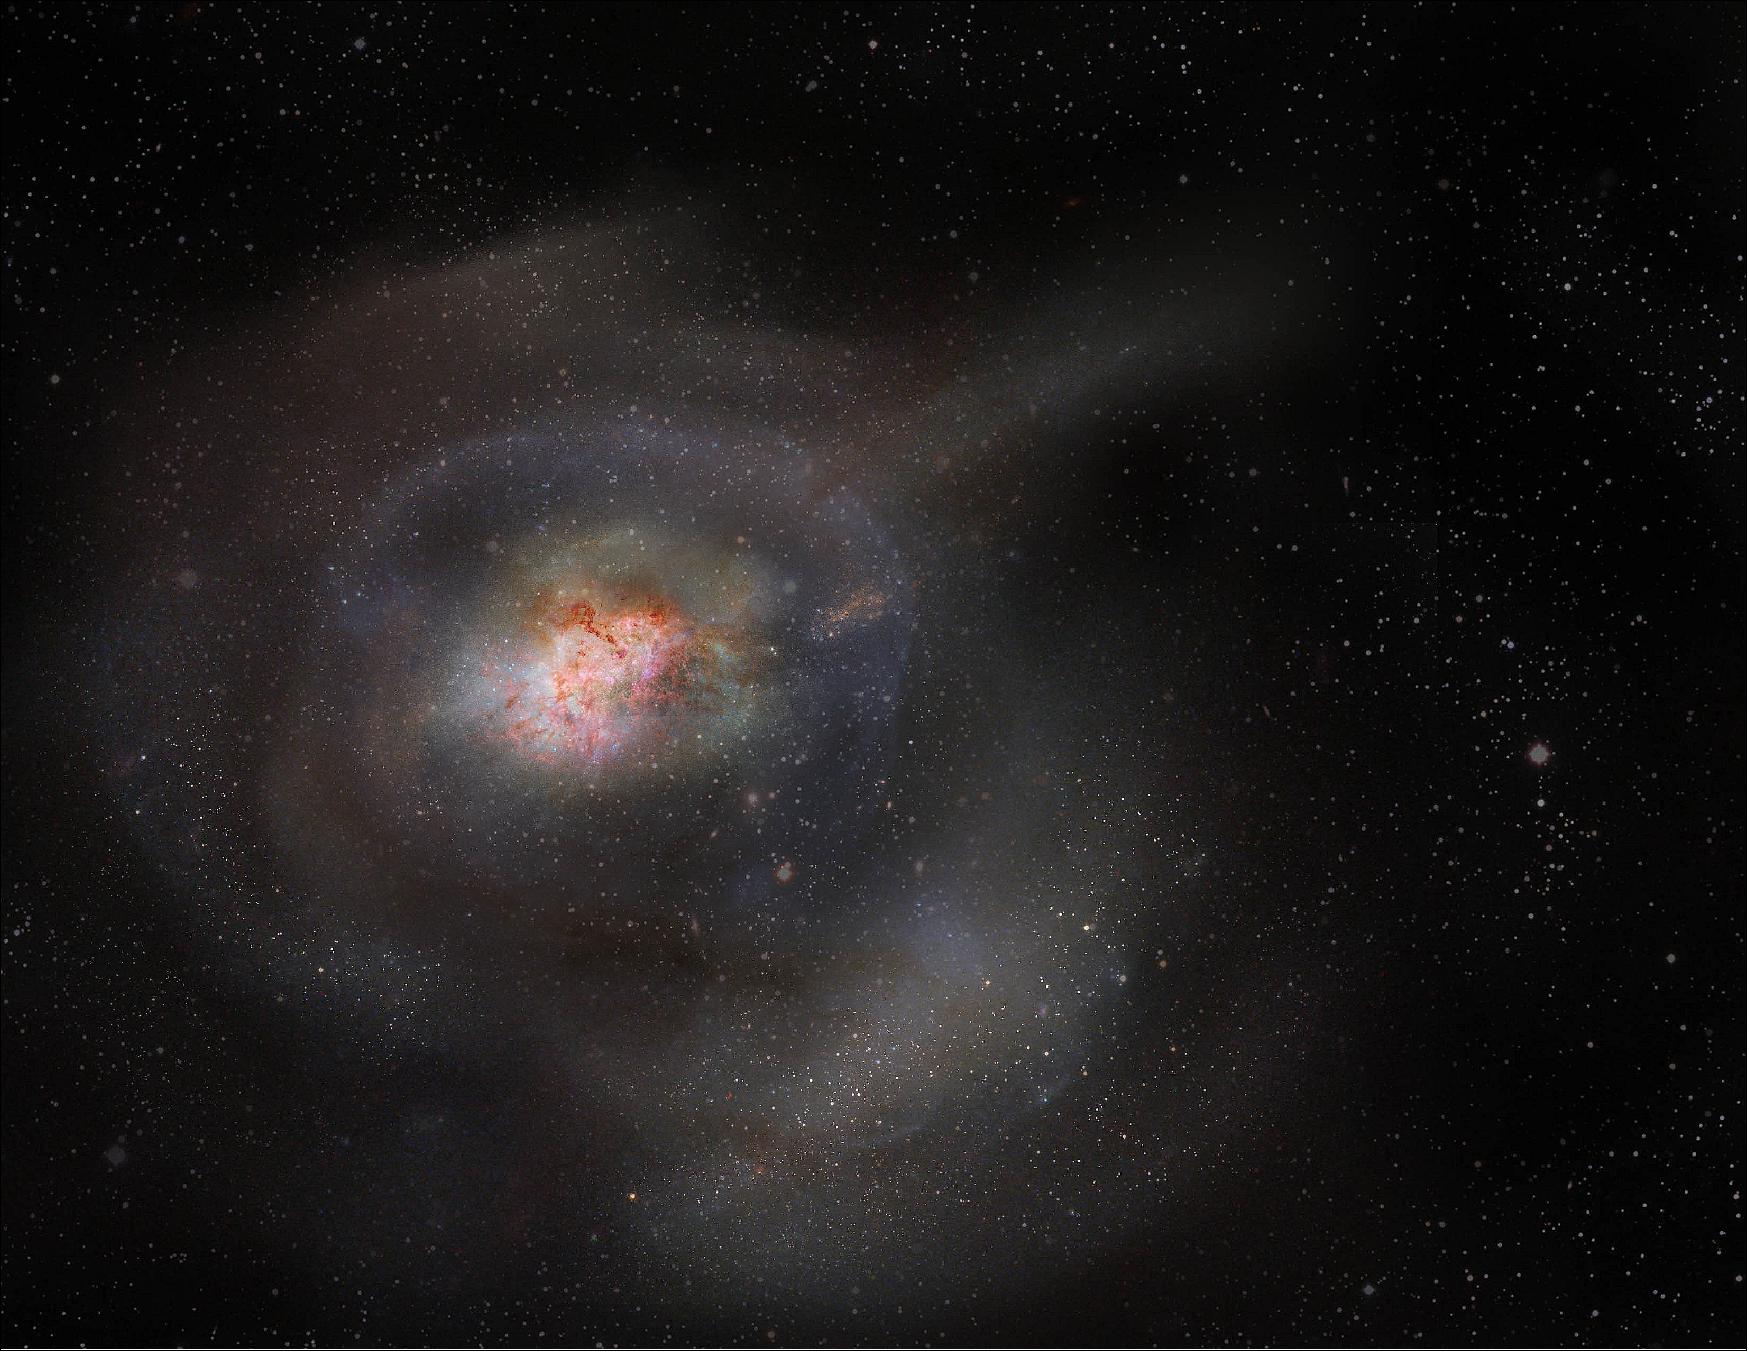 Figure 11: Post-starburst galaxies, or PSBs, were previously thought to expel all of their gas in violent outbursts, leading to quiescence, a time when galaxies stop forming stars. But scientists using the Atacama Large Millimeter/submillimeter Array (ALMA) found that instead, PSBs condense and hold onto this turbulent gas, and then don’t use it to form stars. This artist’s impression highlights the compactness of molecular gas in a PSB and its lack of star formation [image credit: ALMA (ESO/NAOJ/NRAO)/S. Dagnello (NRAO/AUI/NSF)]